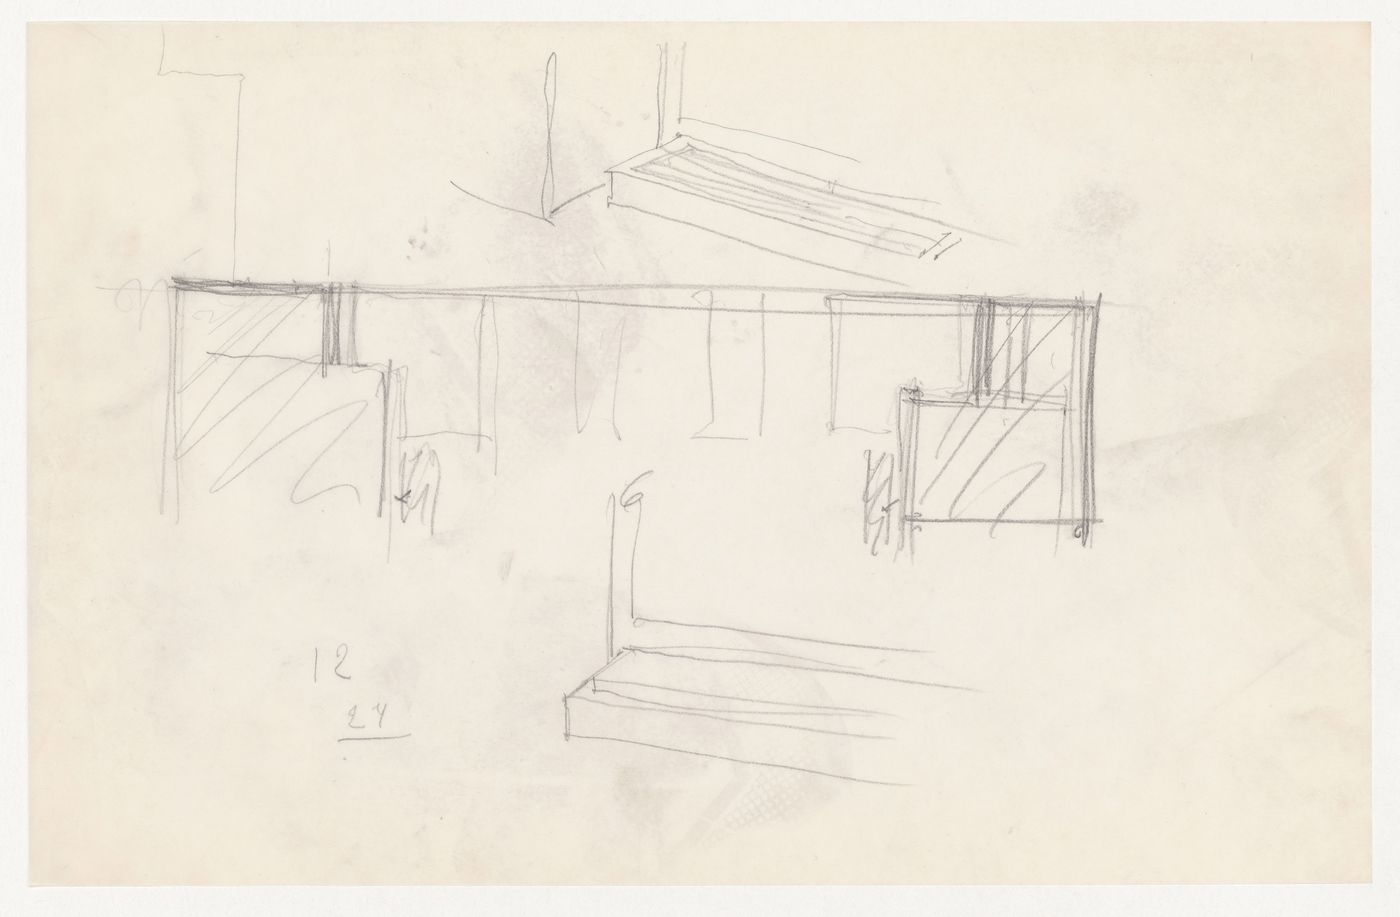 Perspective sketches showing window mullions and raised air ducts and a partial sketch plan for the Metallurgy Building, Illinois Institute of Technology, Chicago